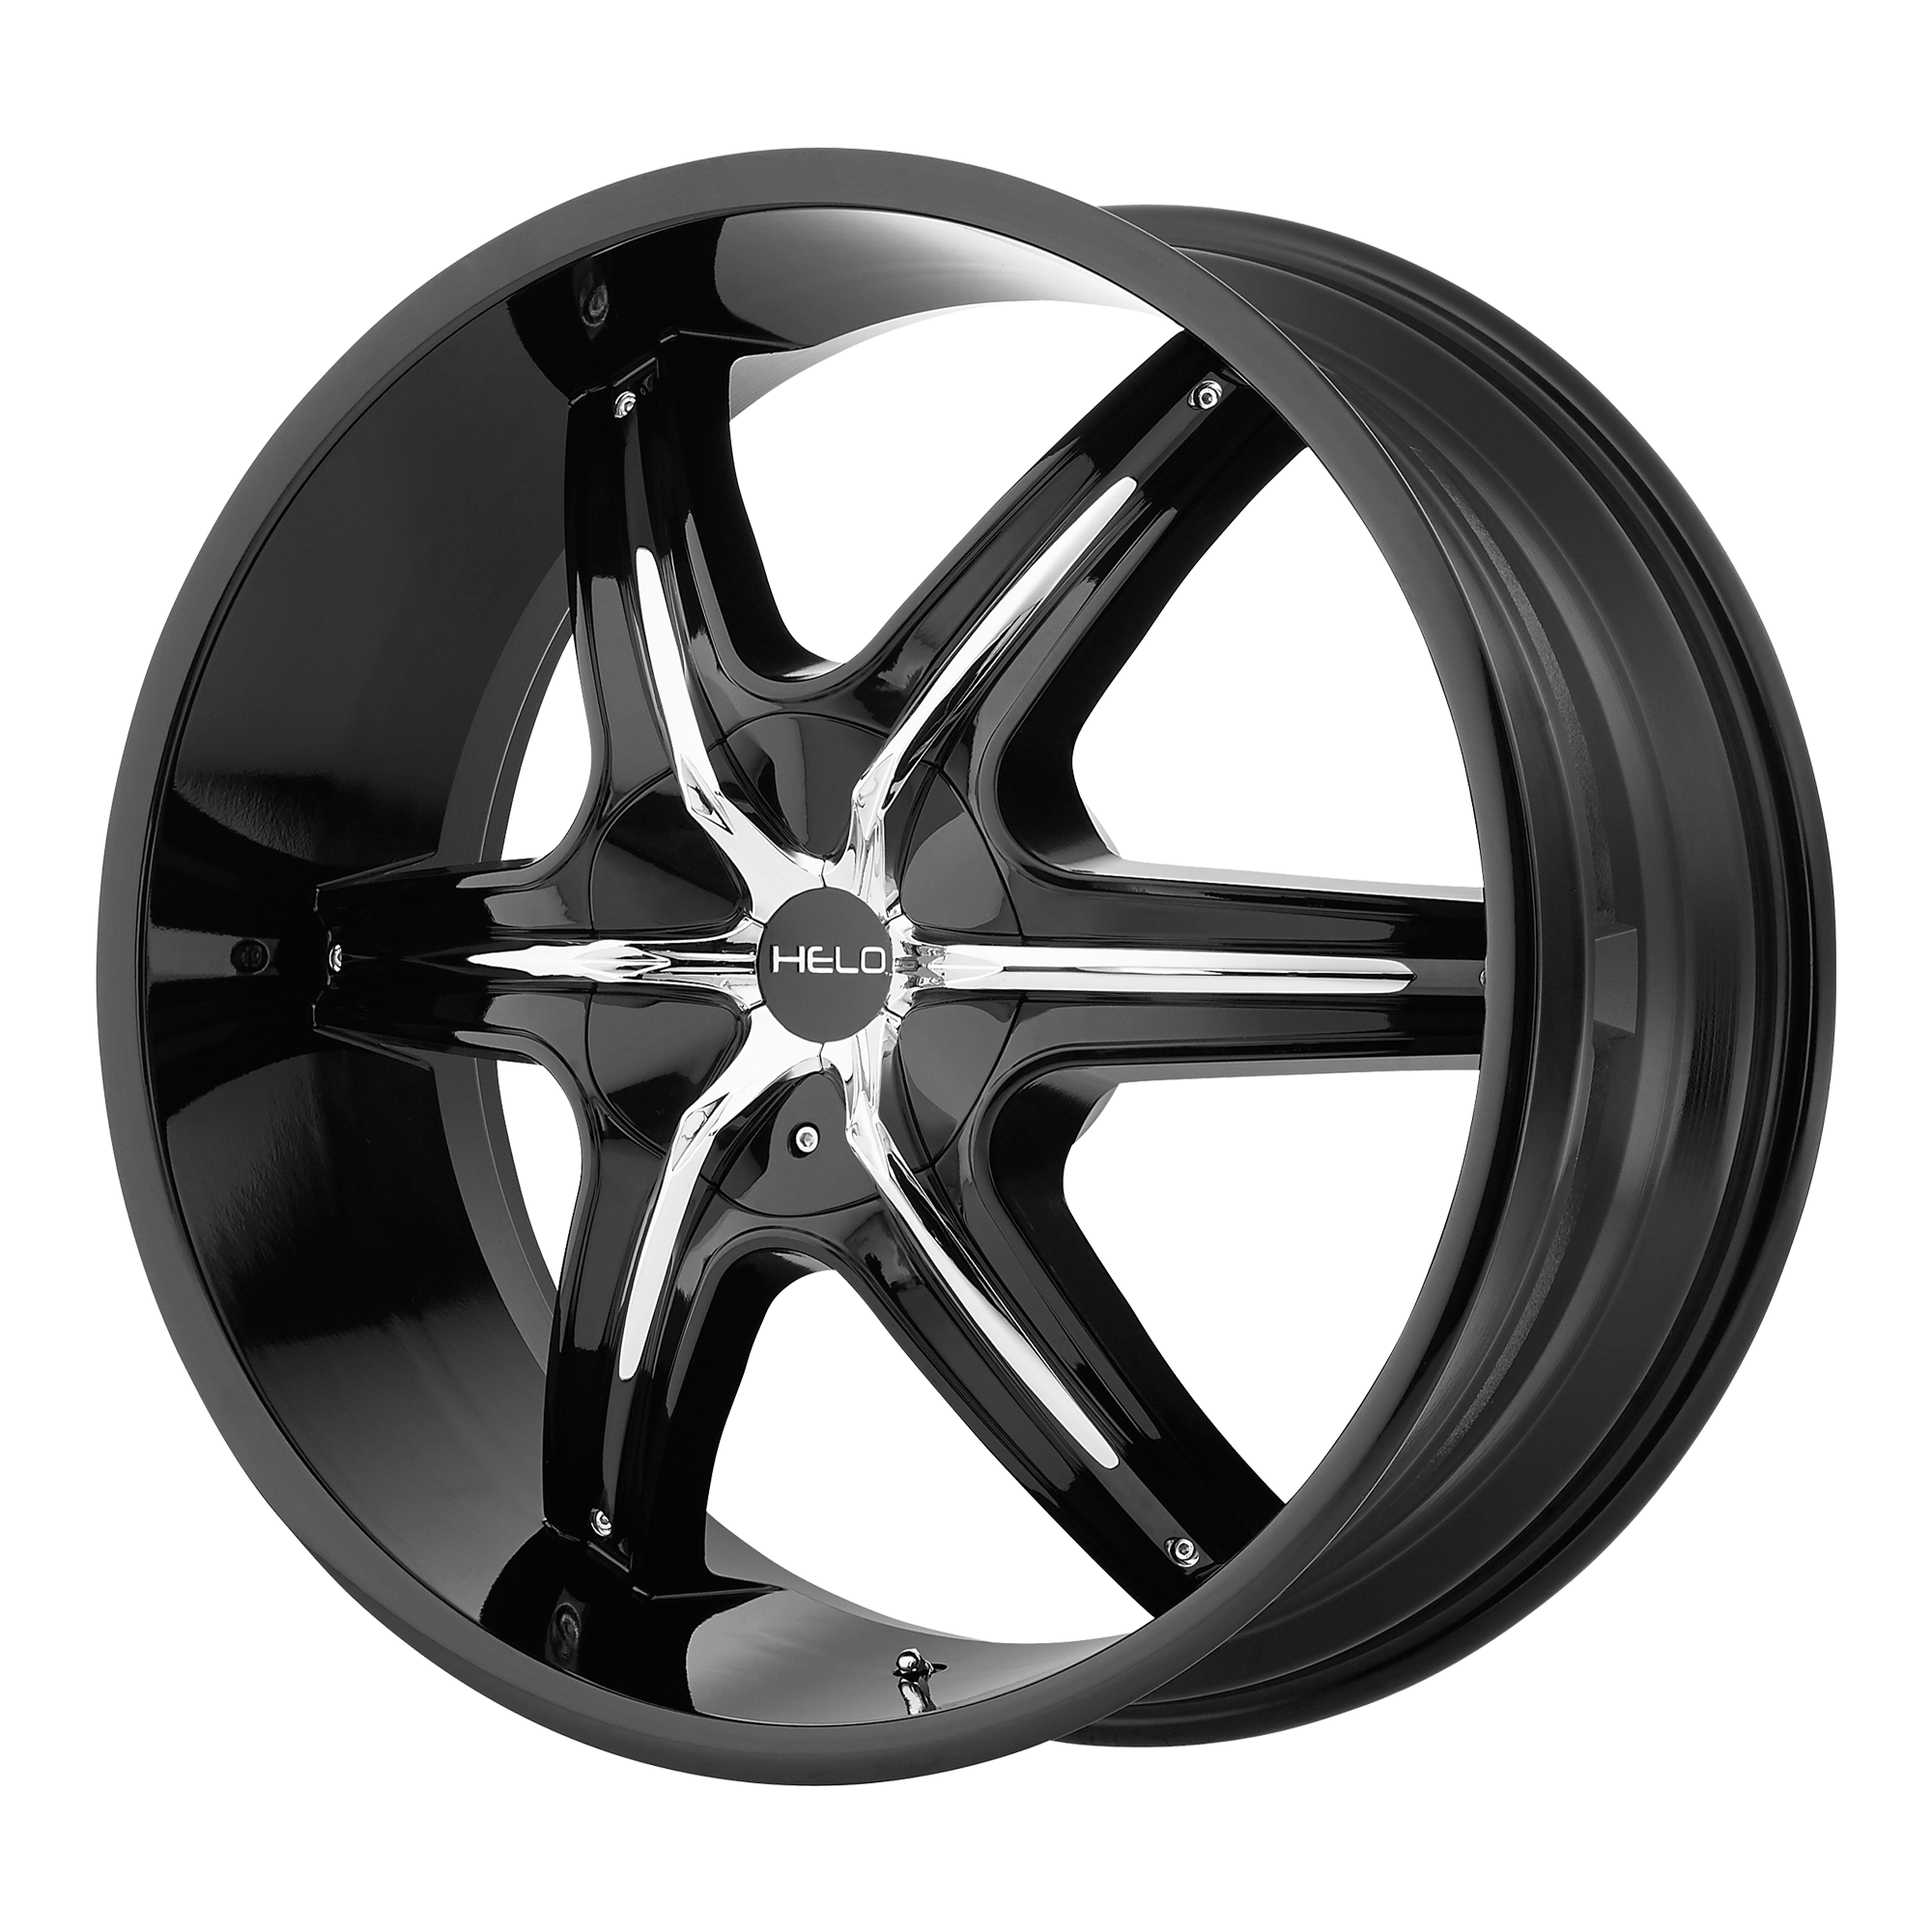 HE891 20x8.5 5x115.00/5x120.65 GLOSS BLACK W/ GLOSS BLACK AND CHROME ACCENTS (10 mm) - Tires and Engine Performance